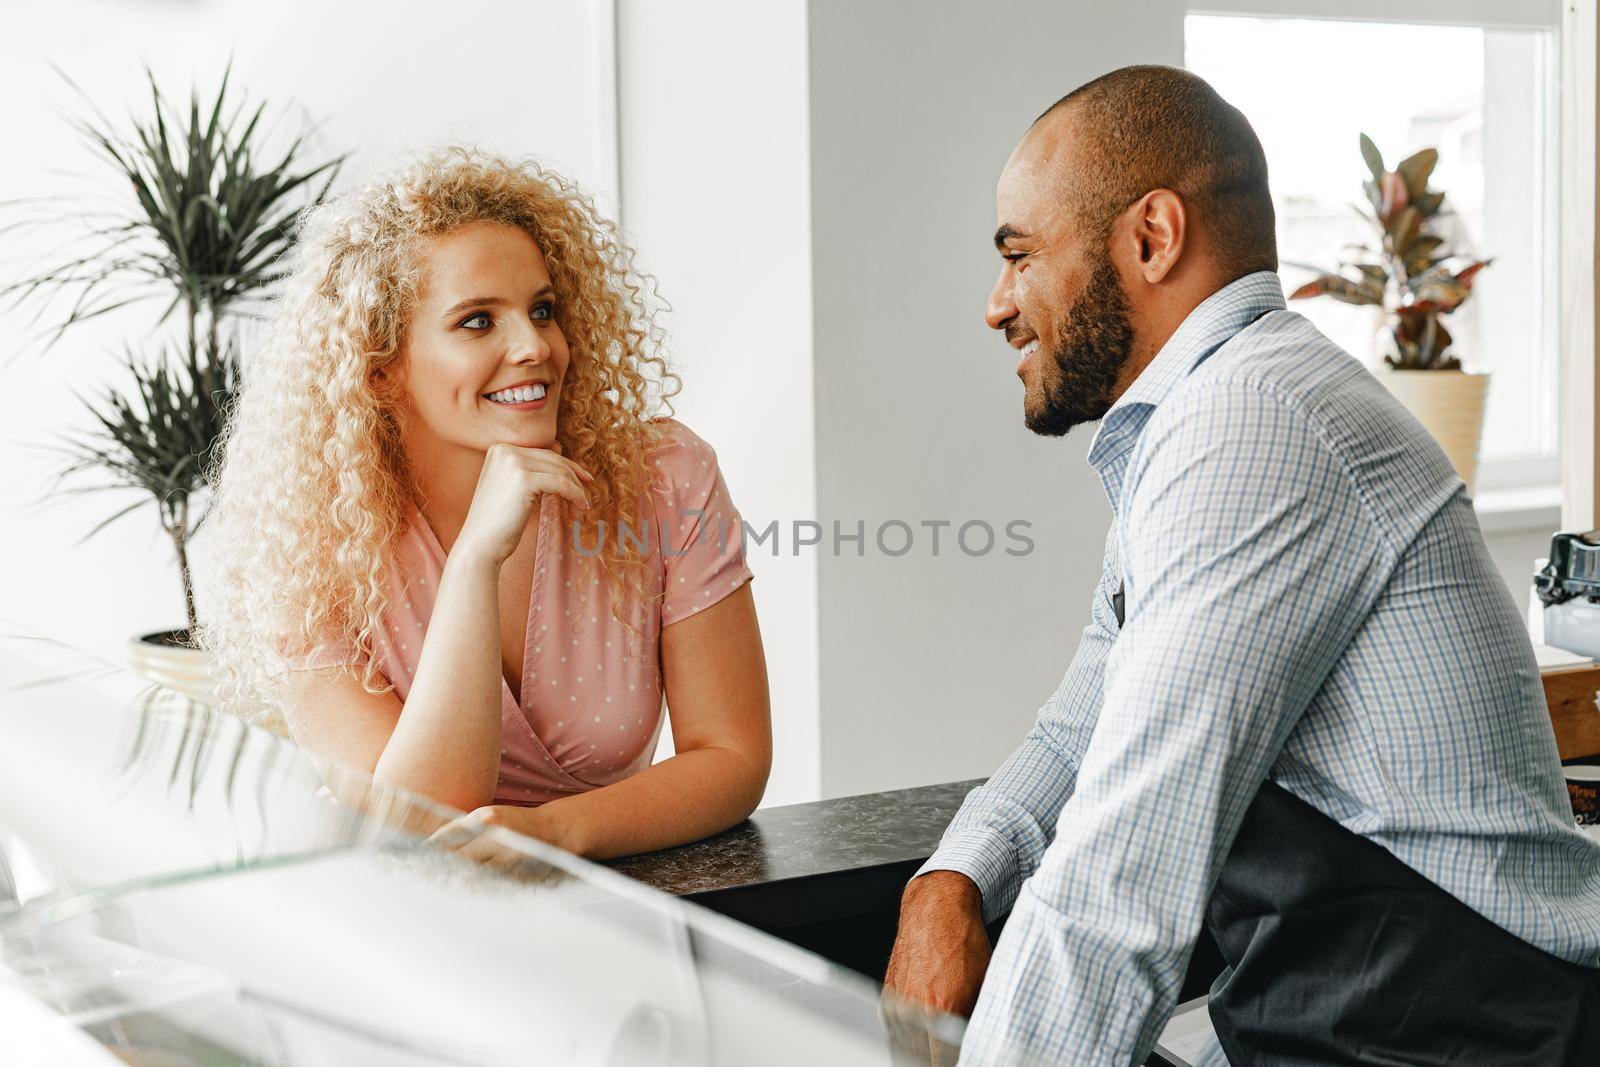 Smiling blonde woman talking to a waiter of a coffee shop at the counter table